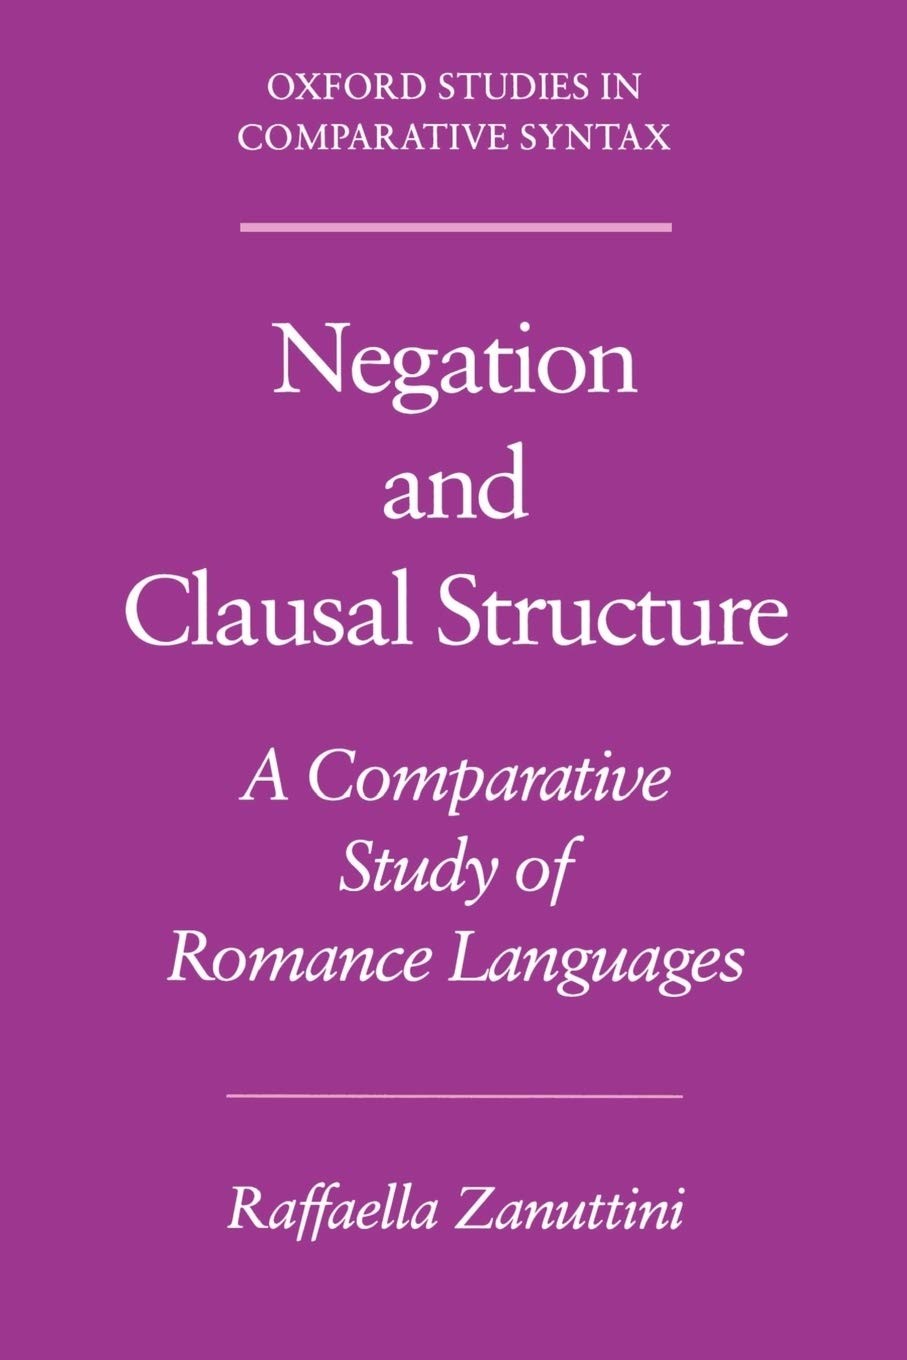 Negation and Clausal Structure: A Comparative Study of Romance Languages